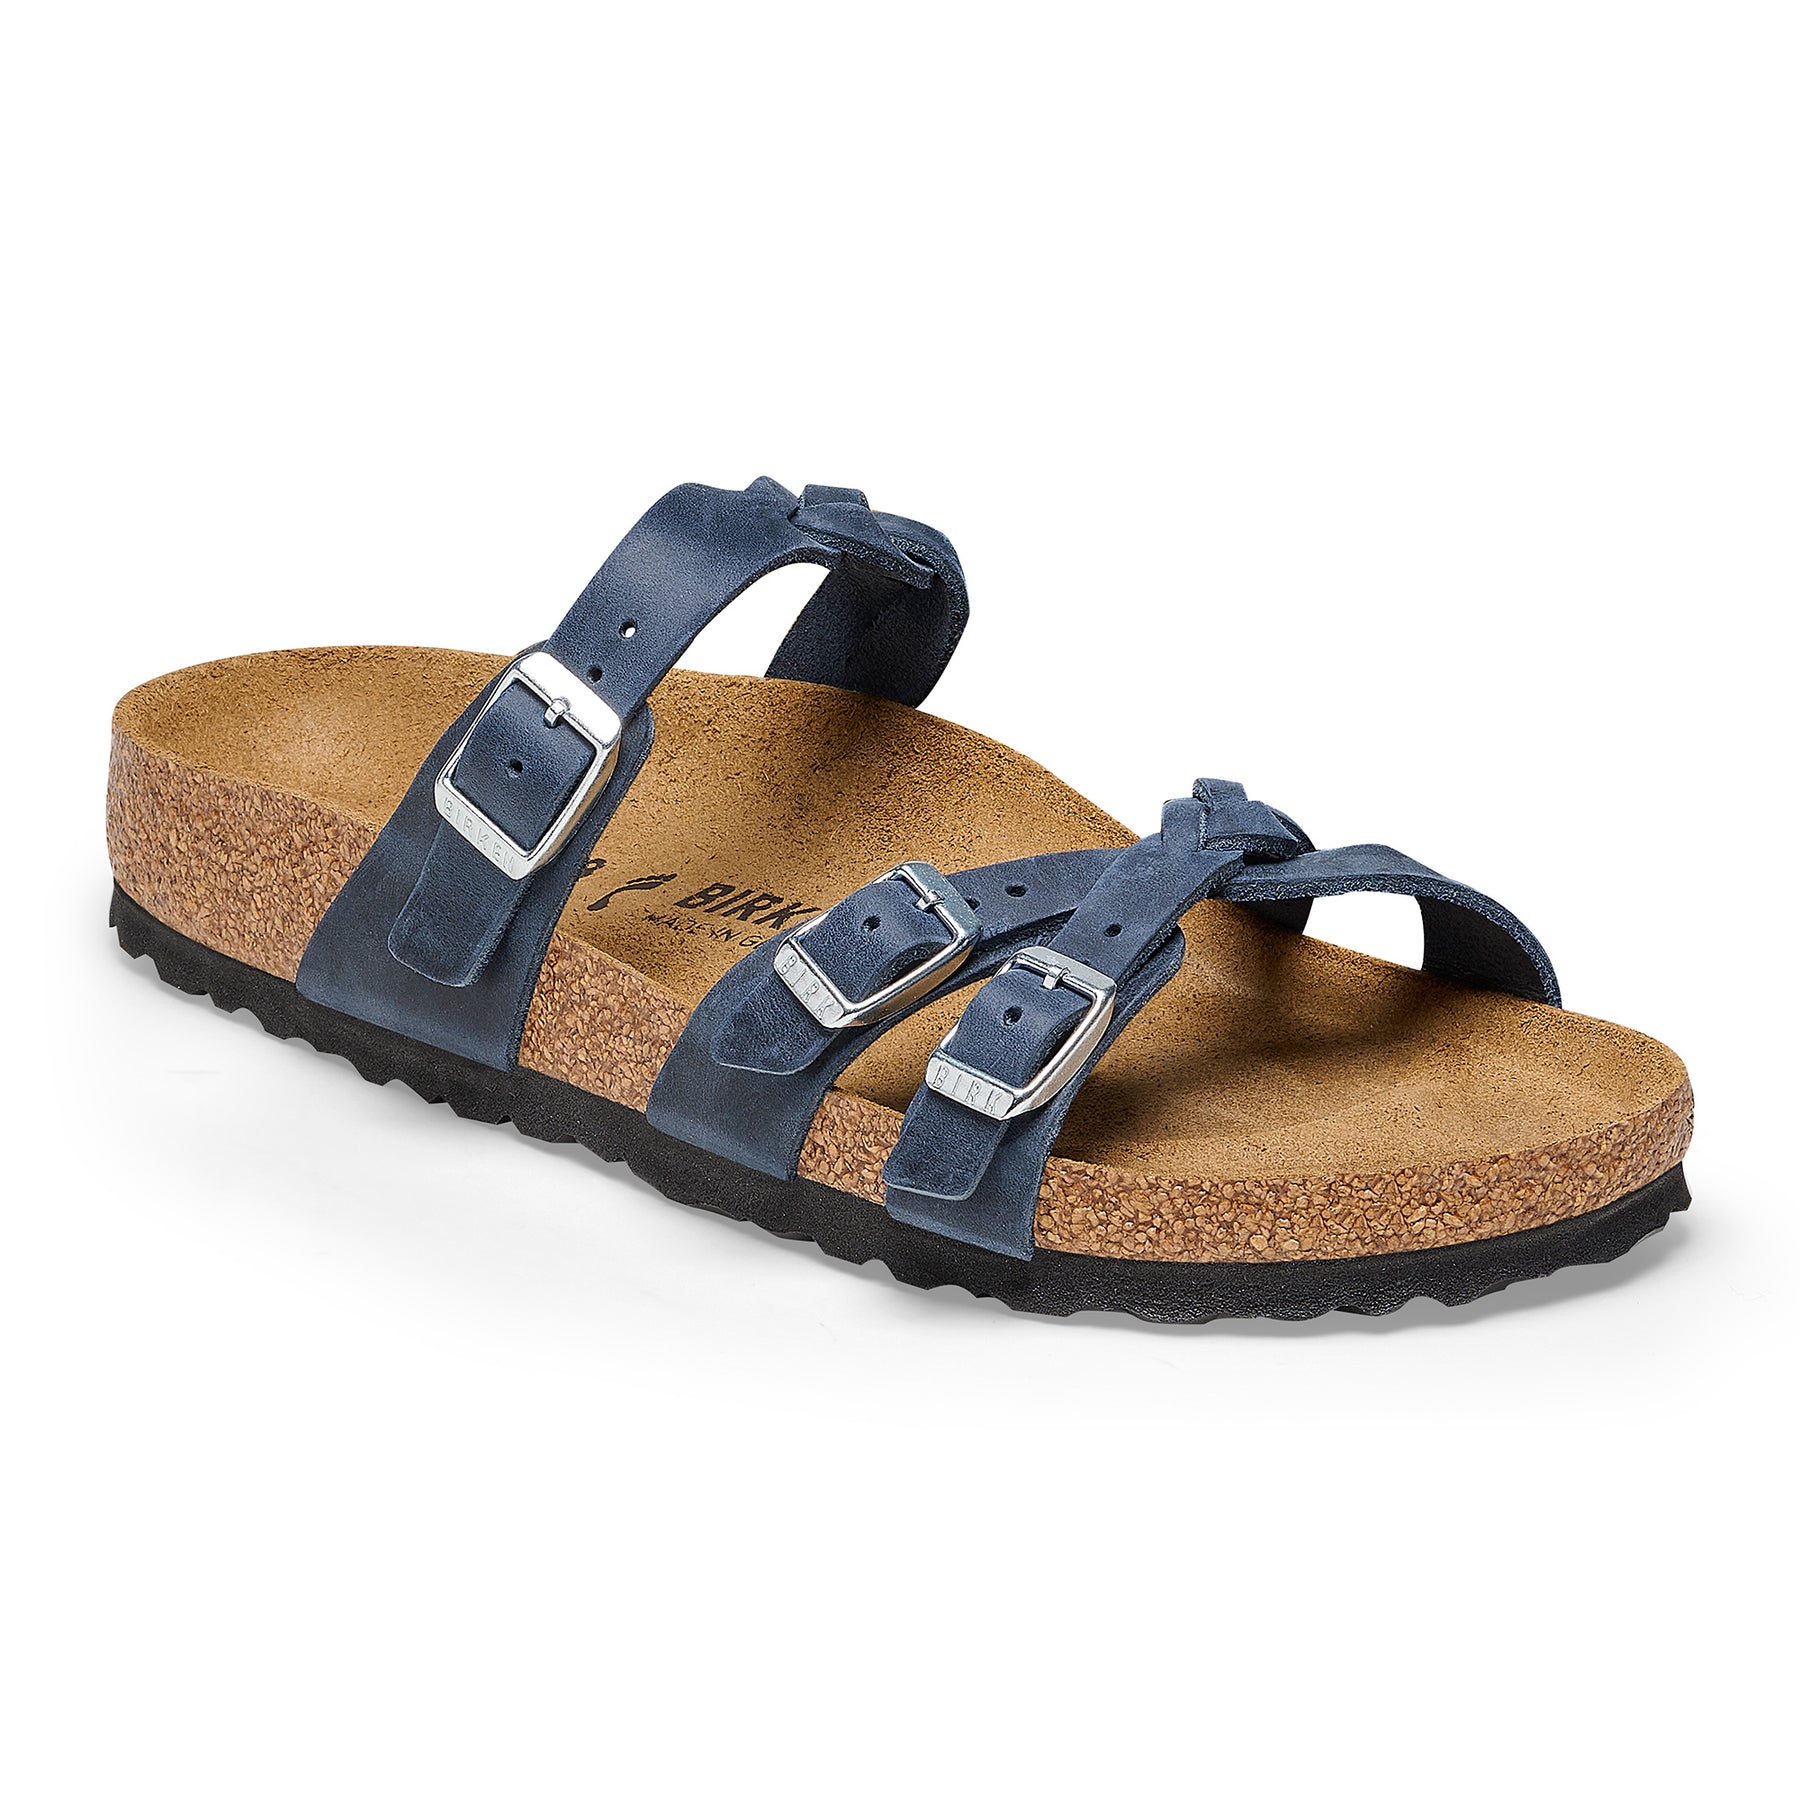 Birkenstock Limited Edition Franca Braid navy oiled leather